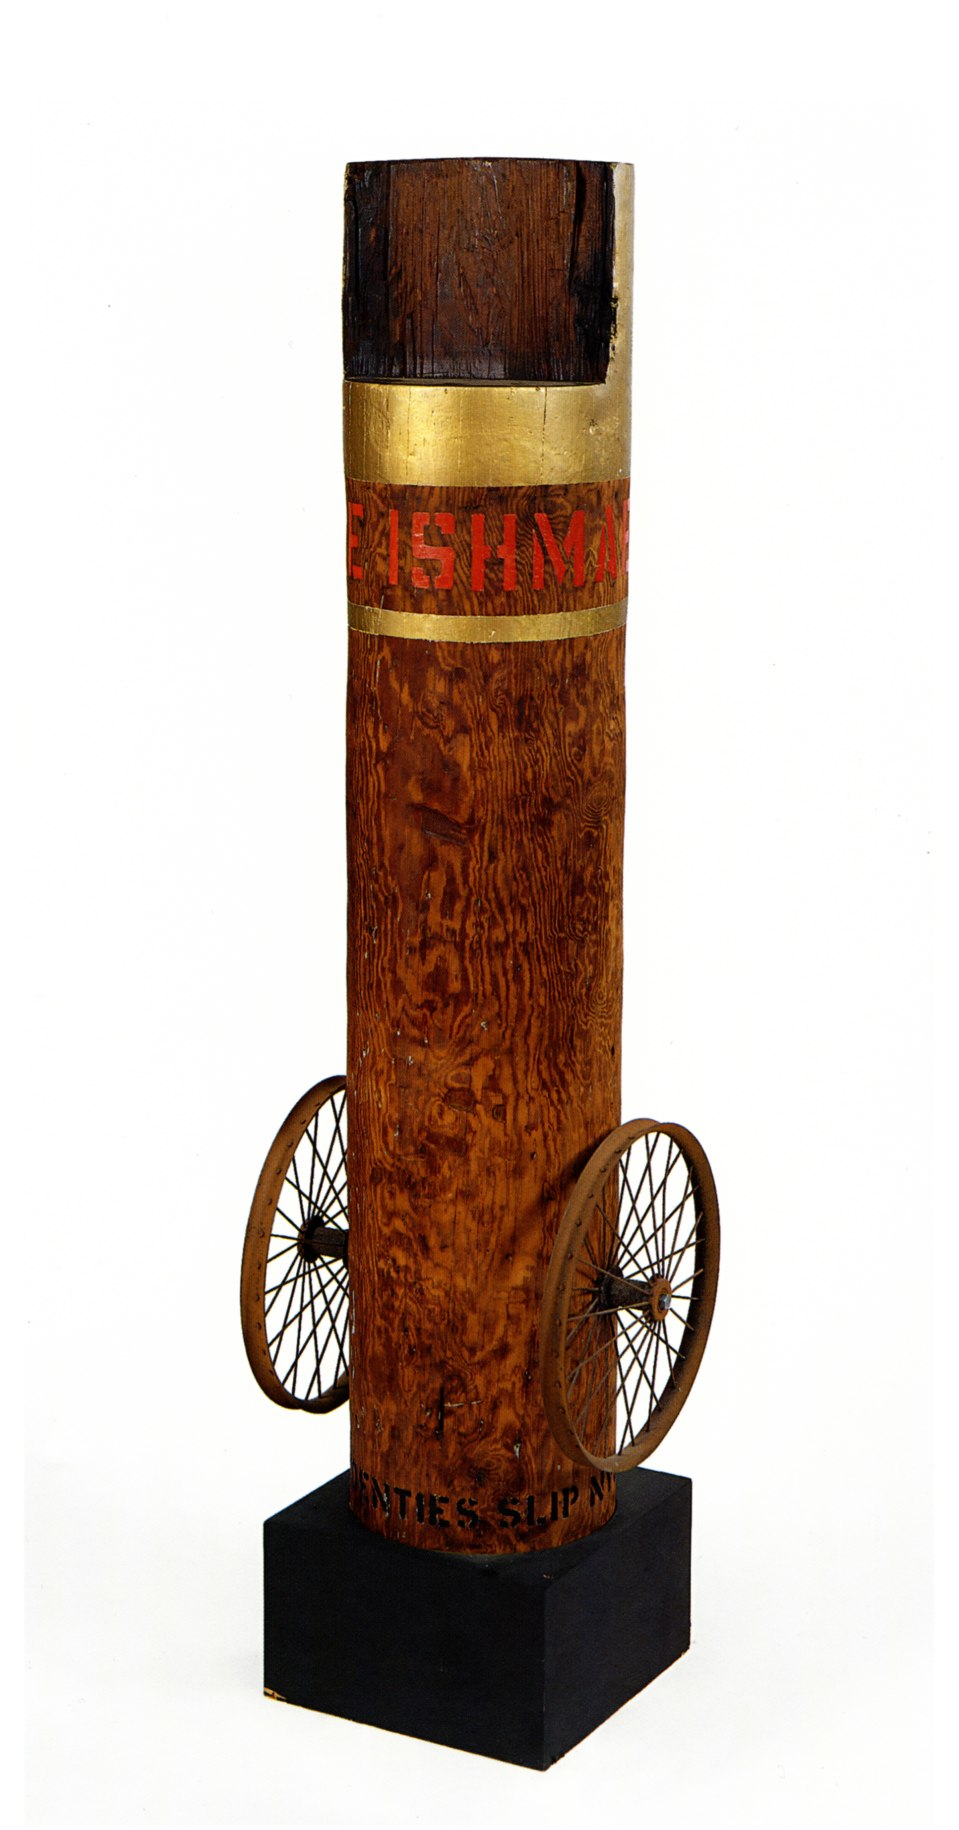 A 62 3/4 by 17 by 14 inch column with an iron wheel affixed on the bottom right and left sides, and standing on a wooden base. The top of the column is painted gold. Below, wrapping around the column, is the work's title, &quot;Call Me Ishmael,&quot; painted in red letters. Below the text a thin gold stripe wraps around the column.